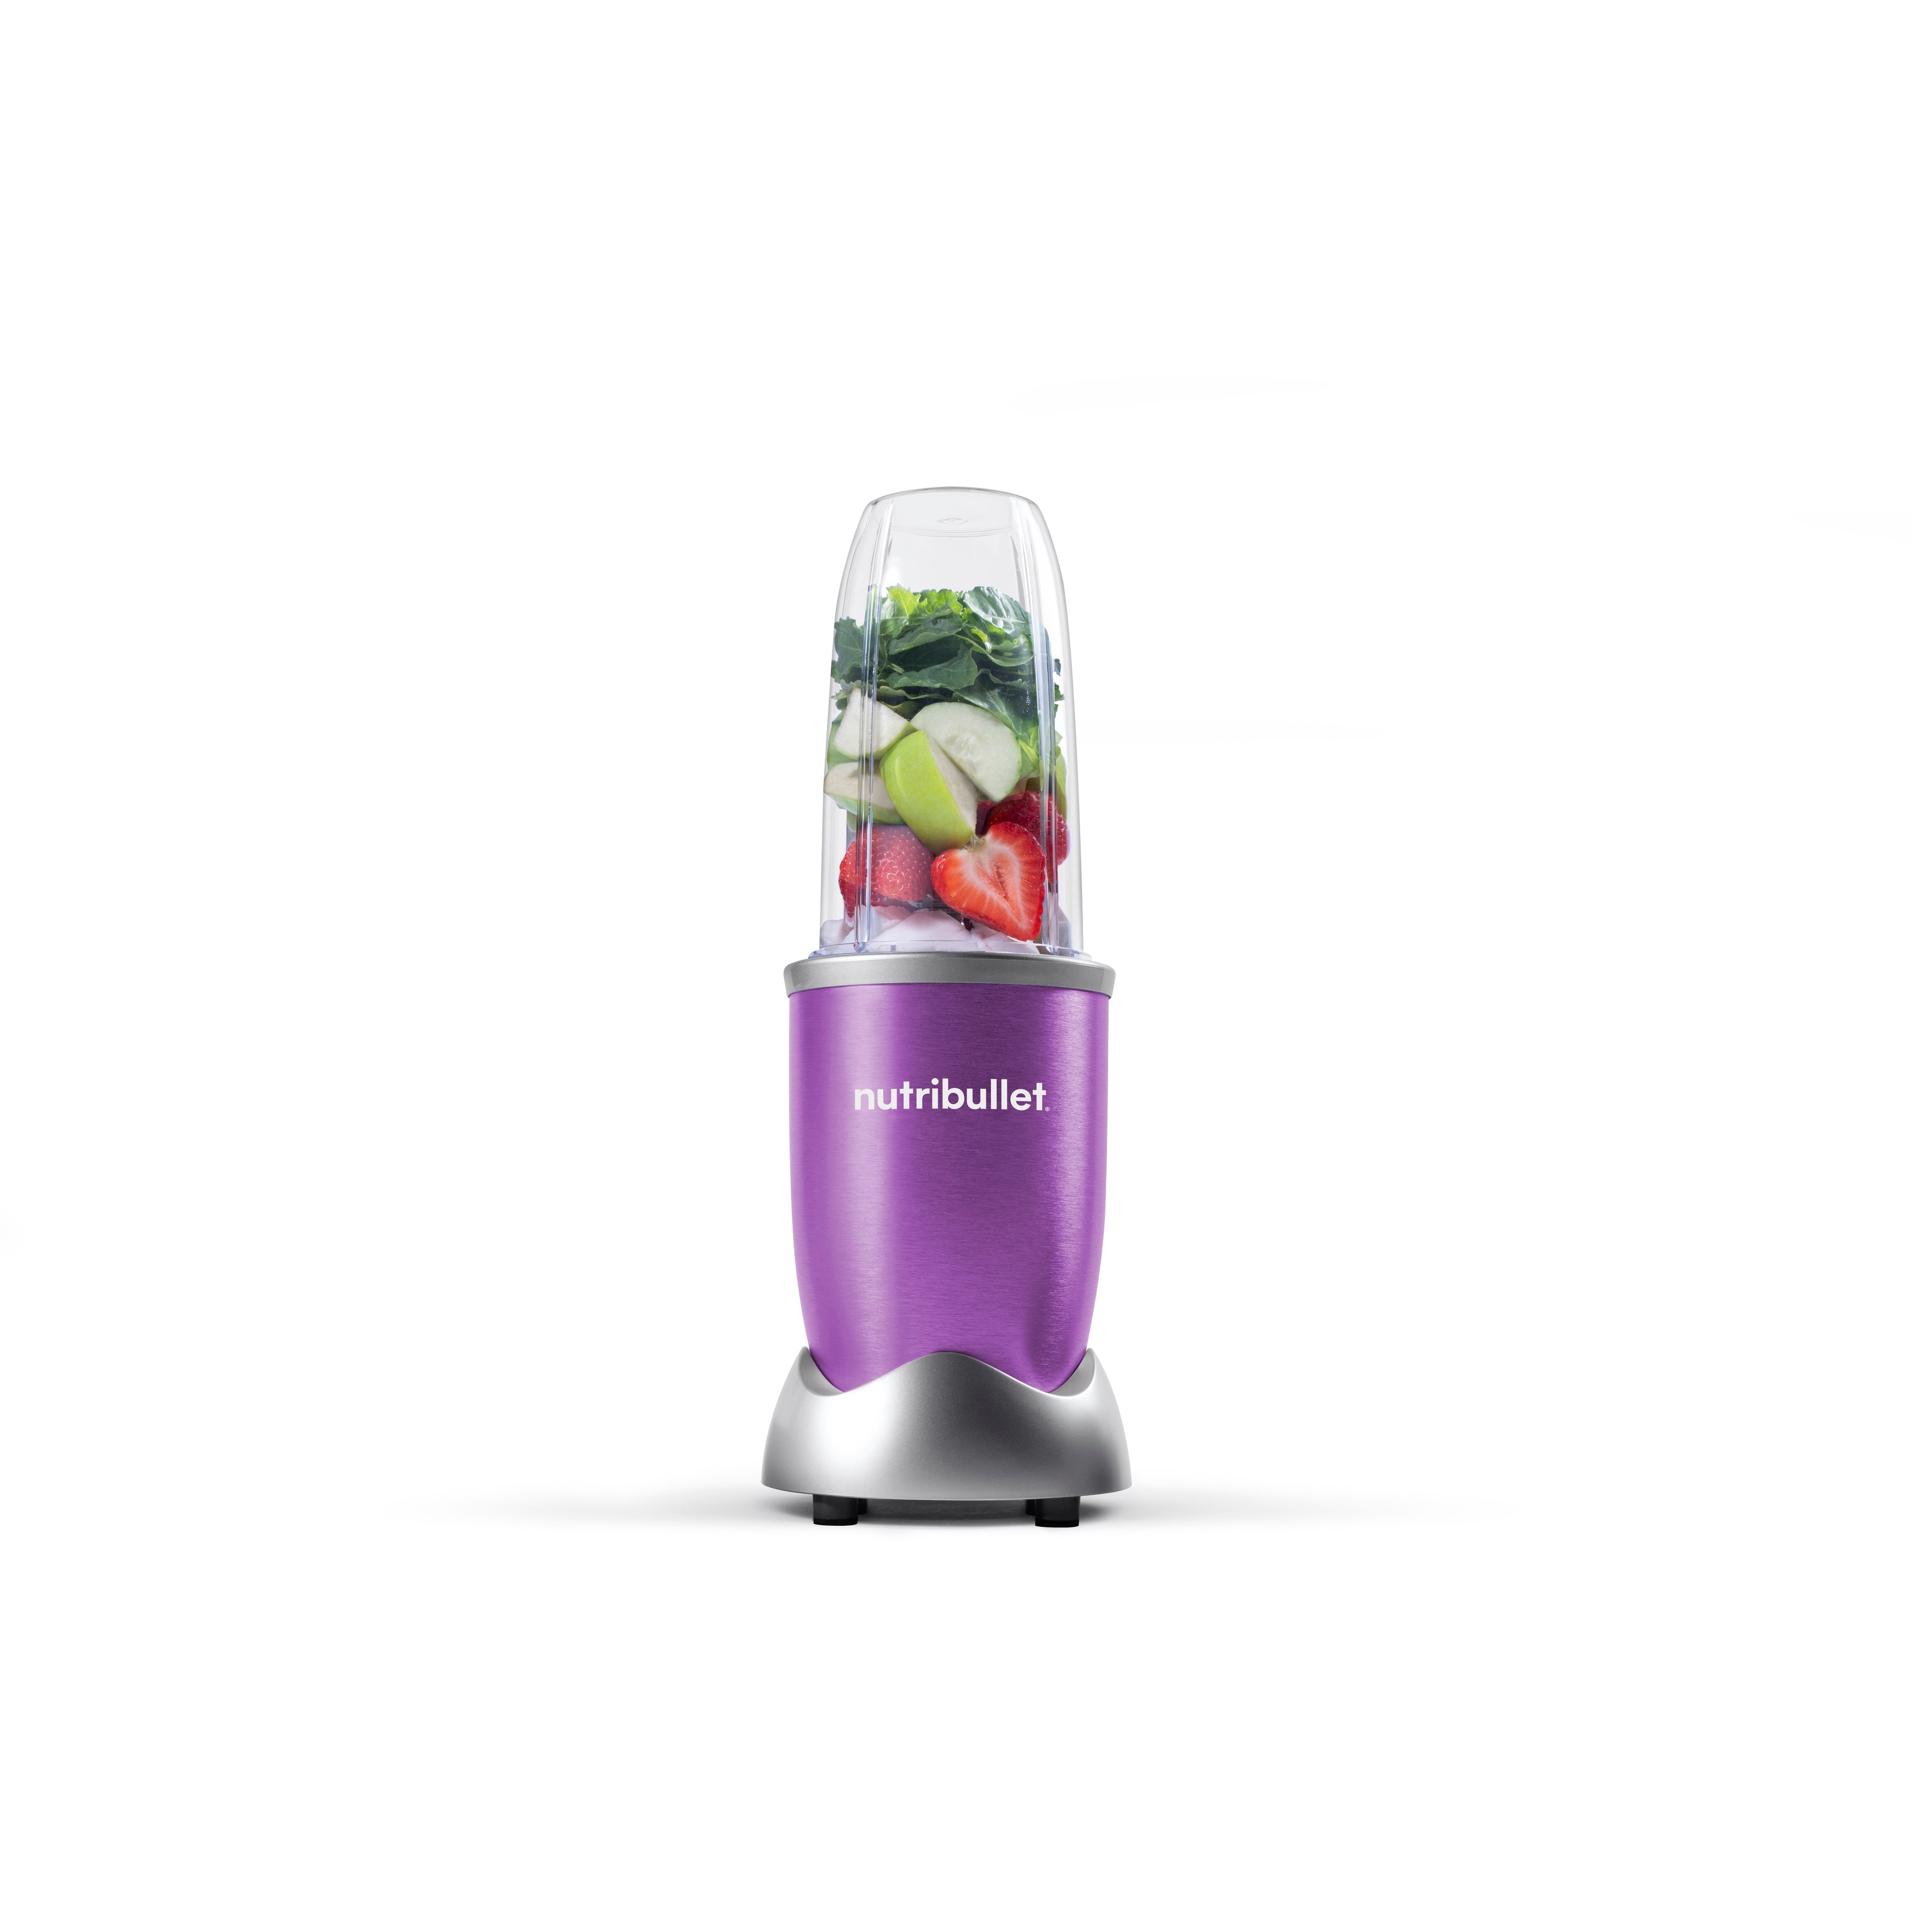 NutriBullet 8-Piece Magic Bullet Superfood Nutrition Extractor